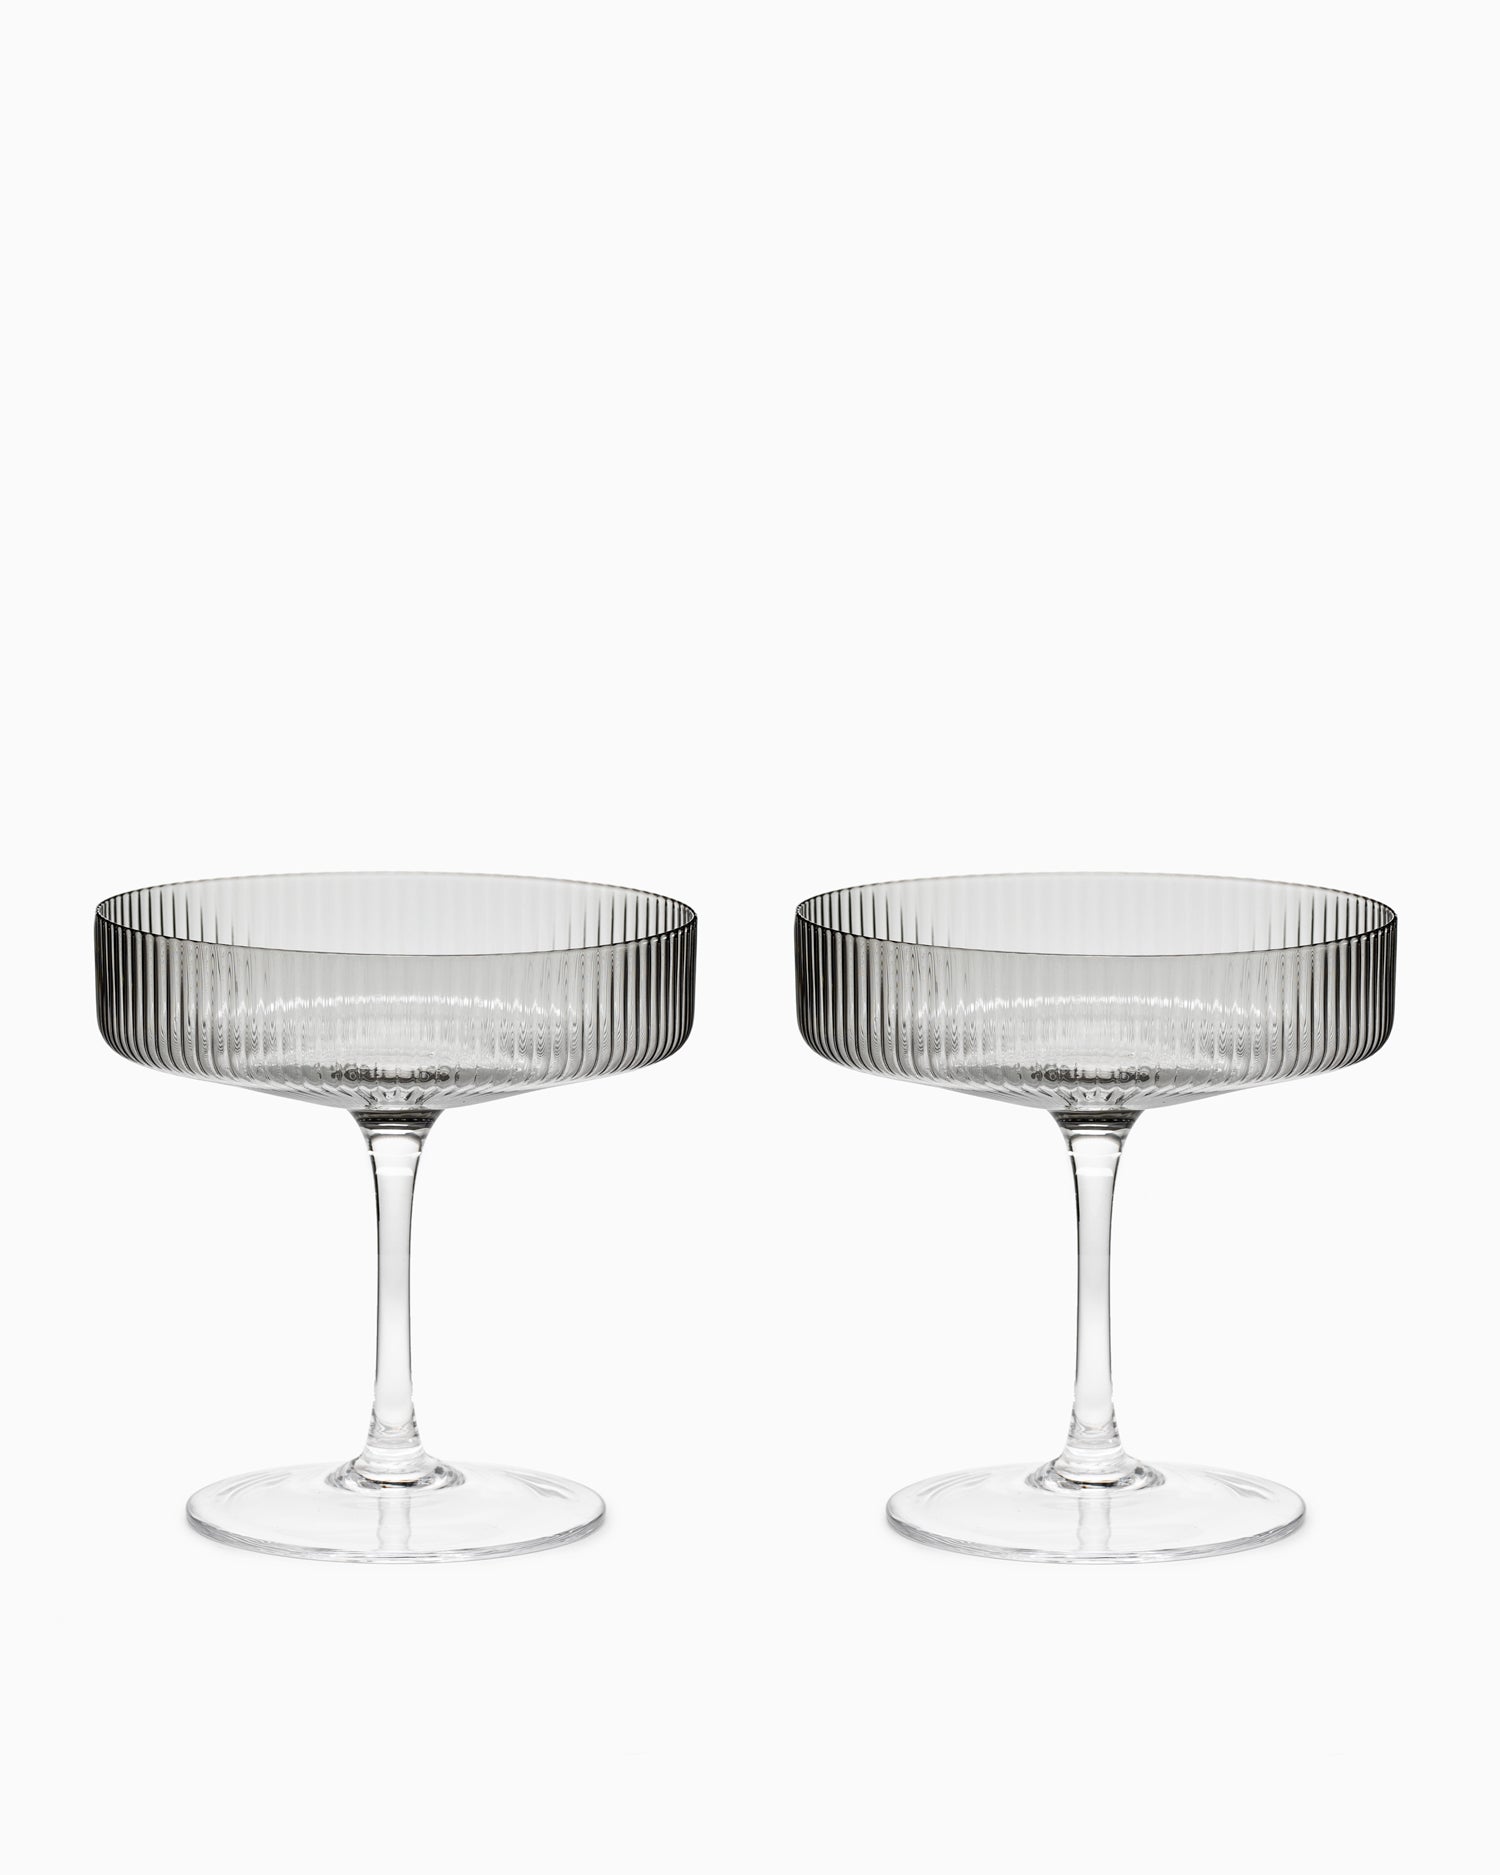 Ripple Champagne Saucer Set of 2 - Smoked